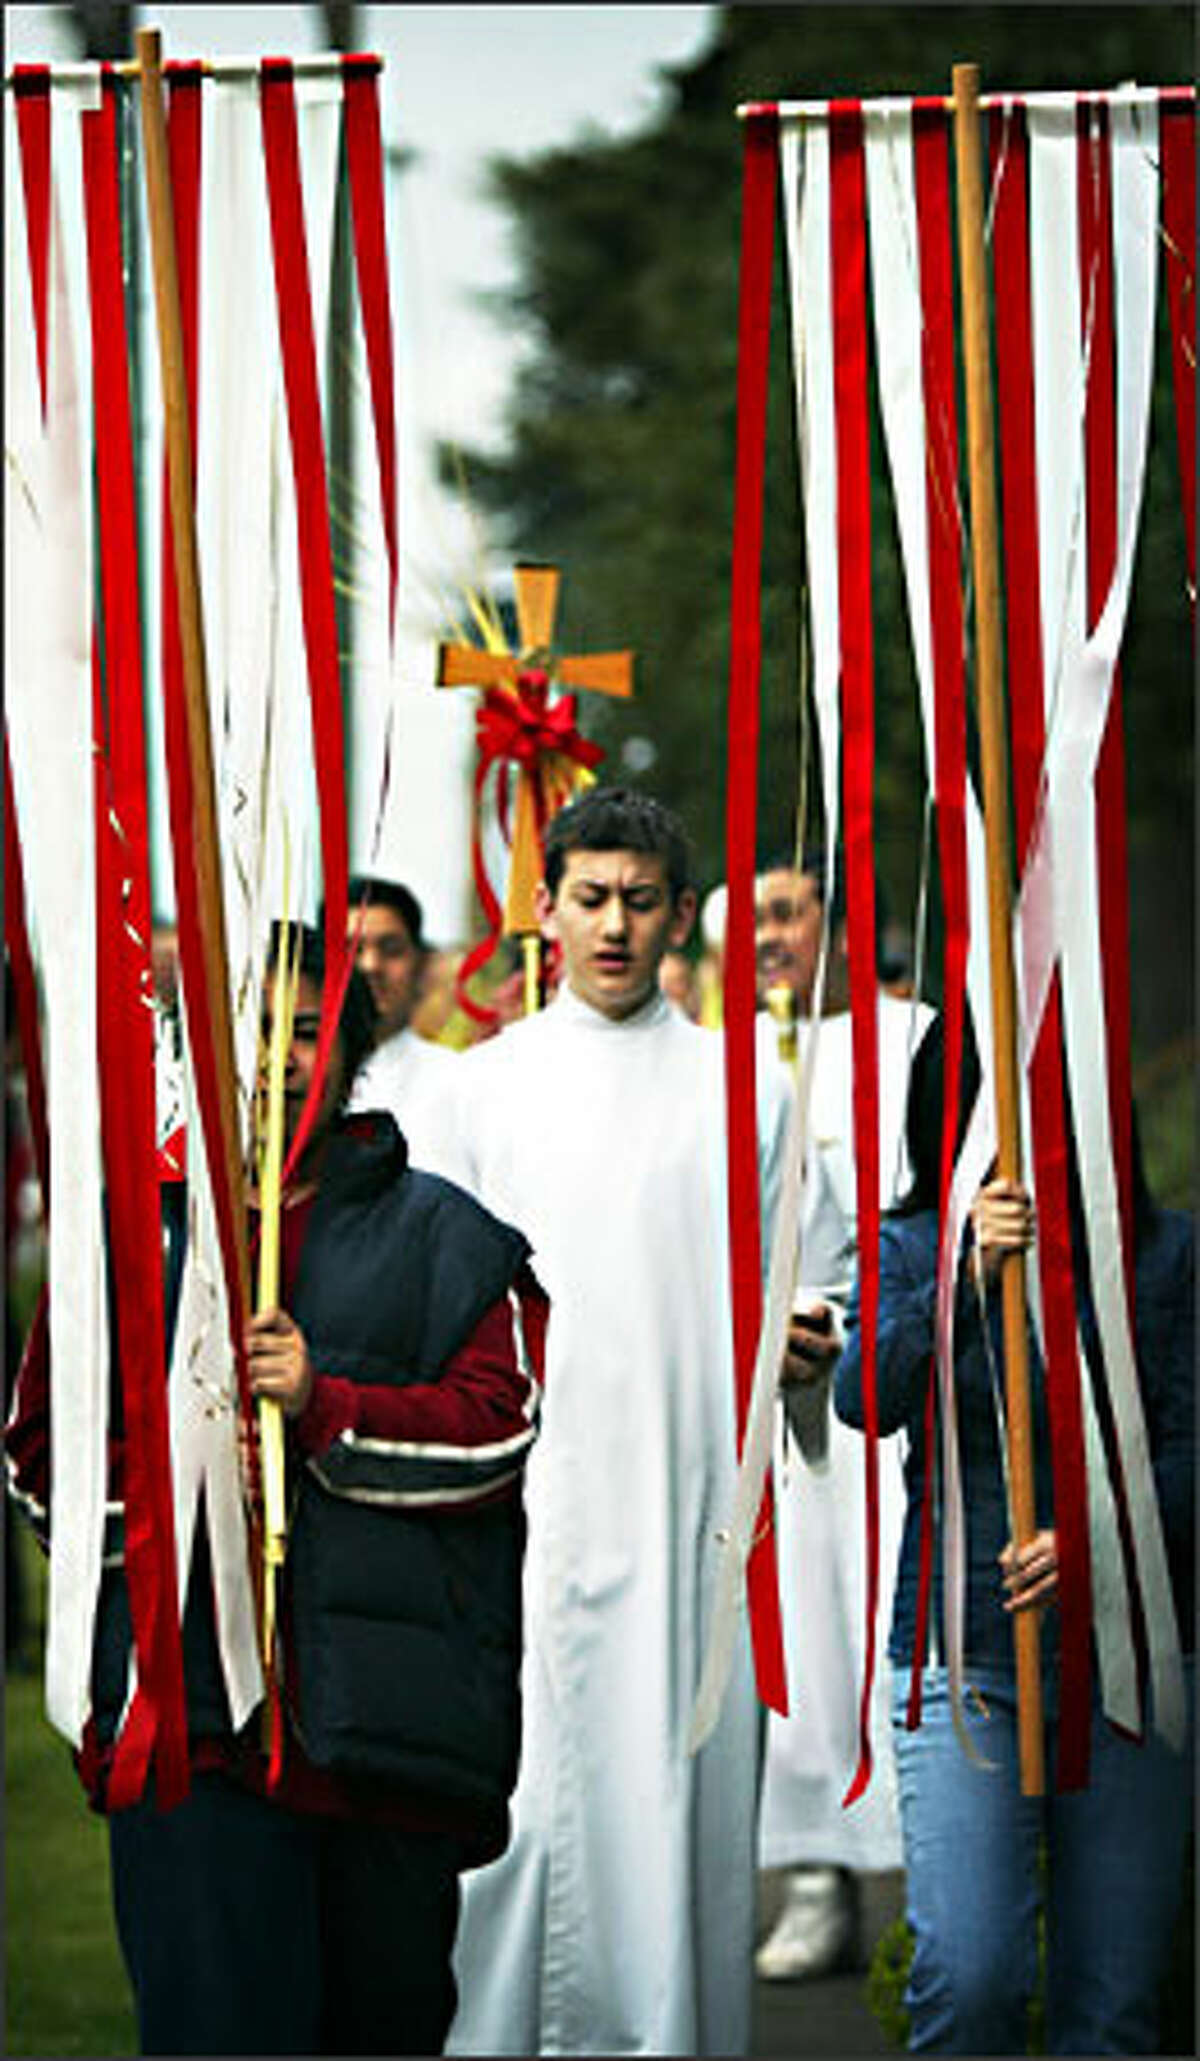 A parishoner holds a cross made from a palm frond during a Palm Sunday procession at St. George Parish in south Seattle on Sunday. Parishoners walked from St. George’s School to the church down the block, carrying palm fronds and singing in celebration of Palm Sunday. Palm Sunday is celebrated as the day that Jesus entered Jerusalem and begins a holy week that ends with Easter Sunday.